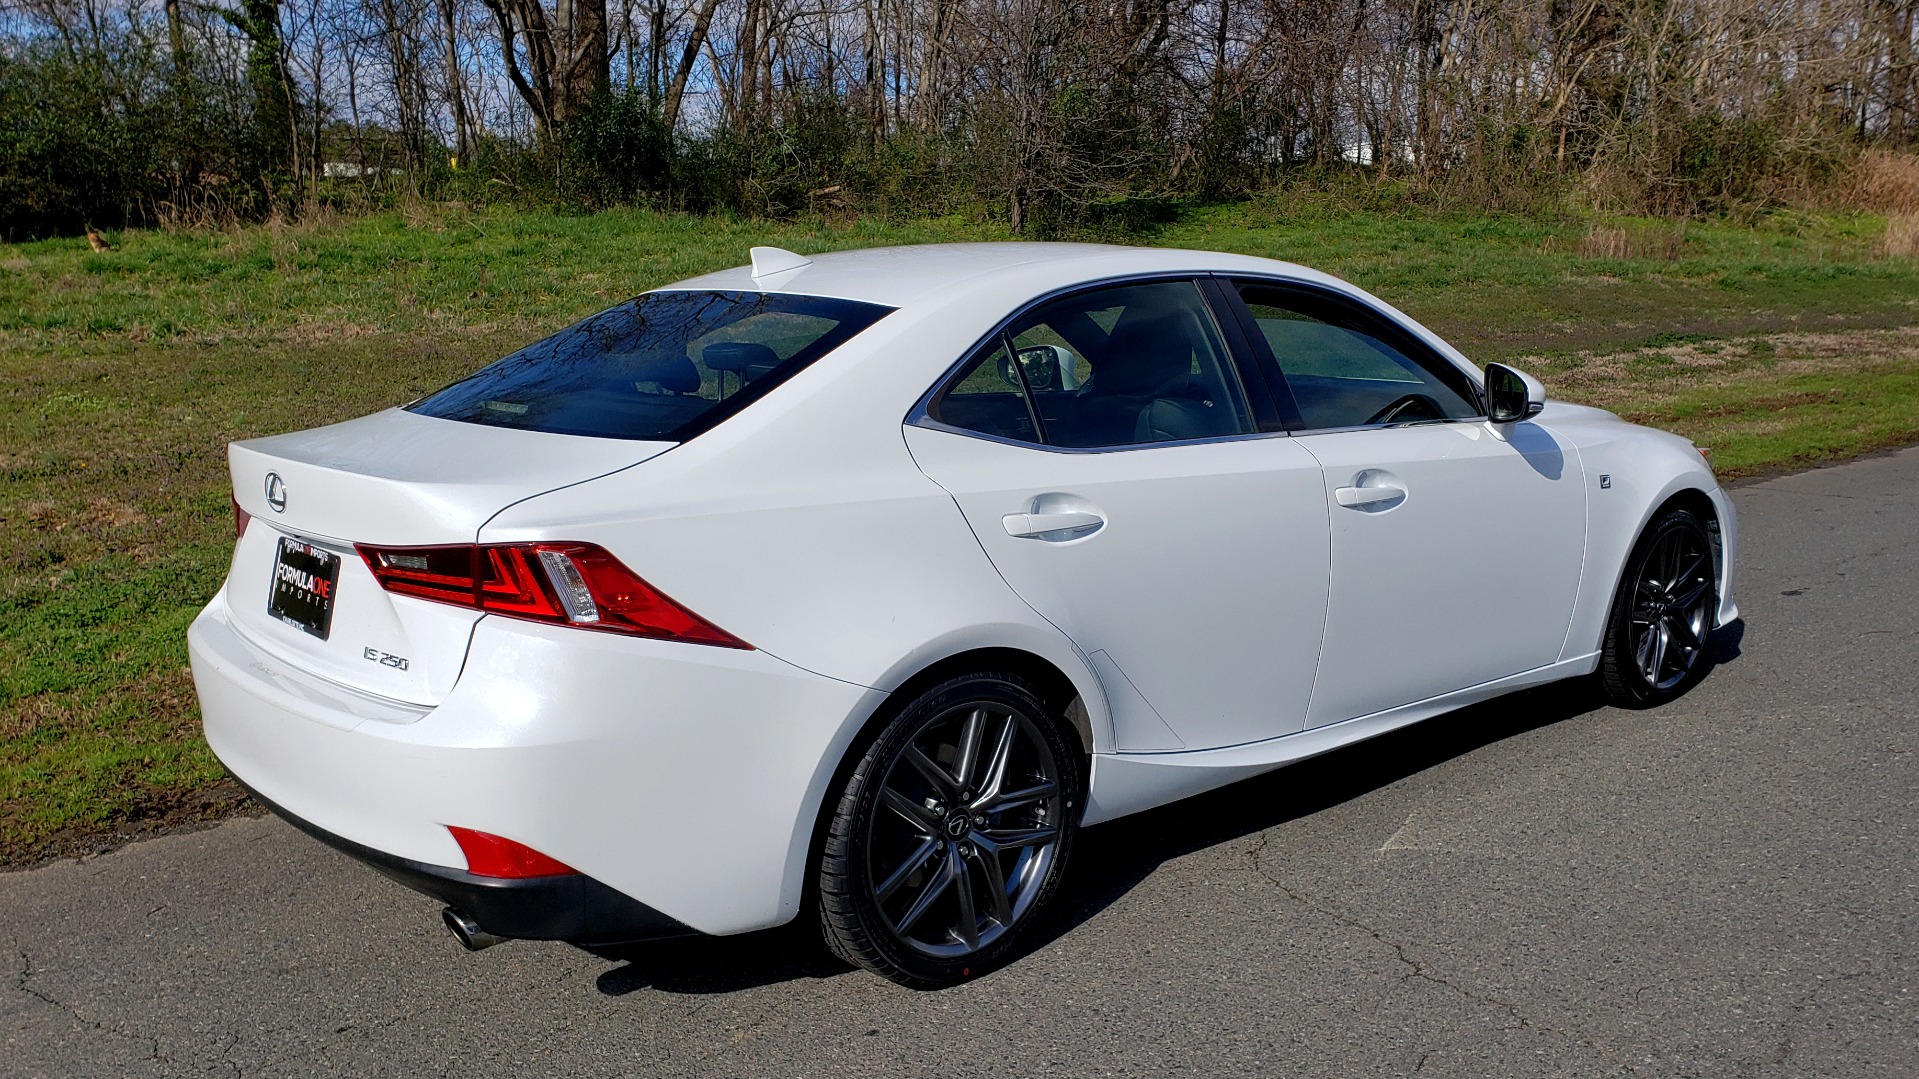 Used 2014 Lexus IS 250 F-SPORT / NAV / SUNROOF / REARVIEW / BSM for sale Sold at Formula Imports in Charlotte NC 28227 6